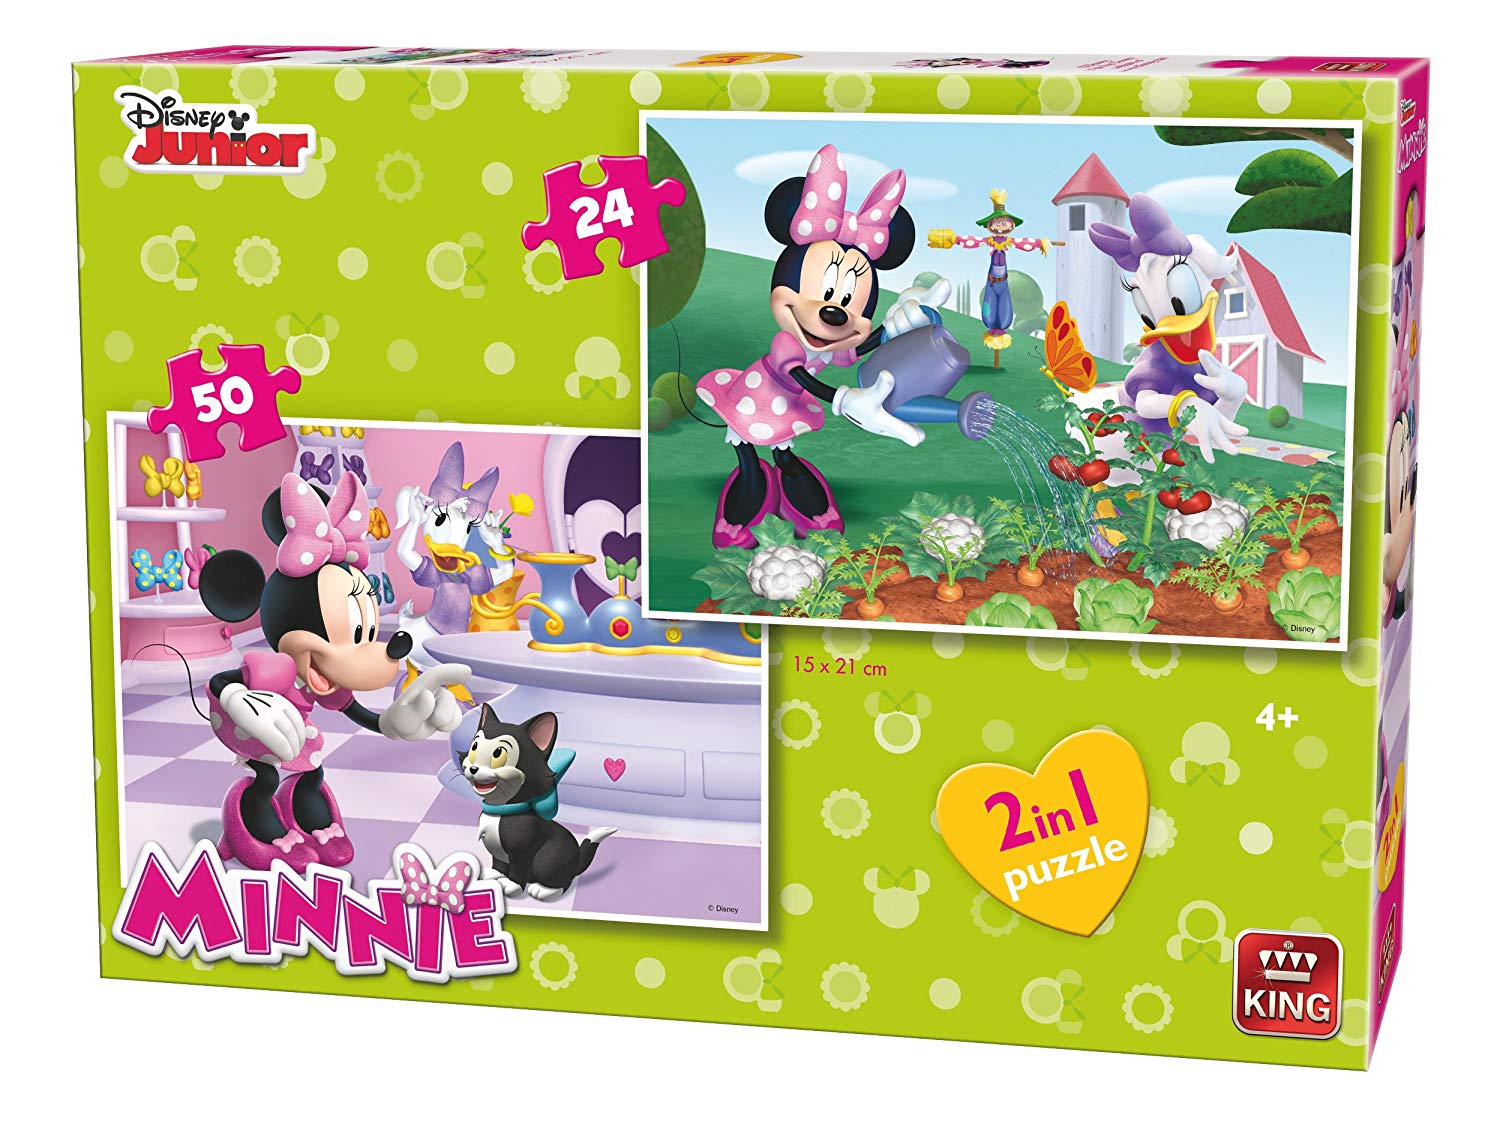 King 5414 2-In-1 Puzzle Disney Minnie Bow Tique